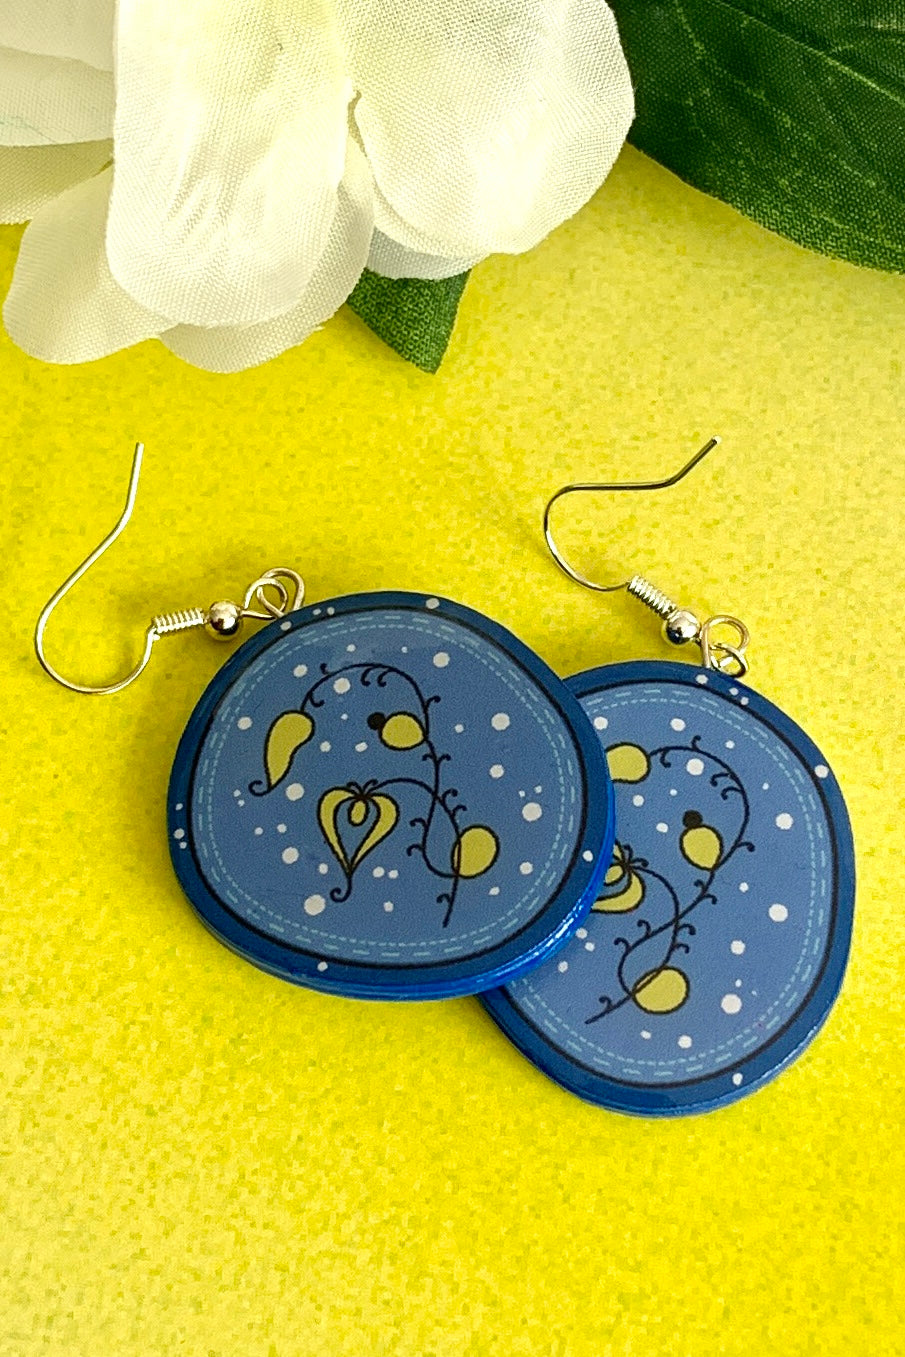 Squished circle shaped paper earrings